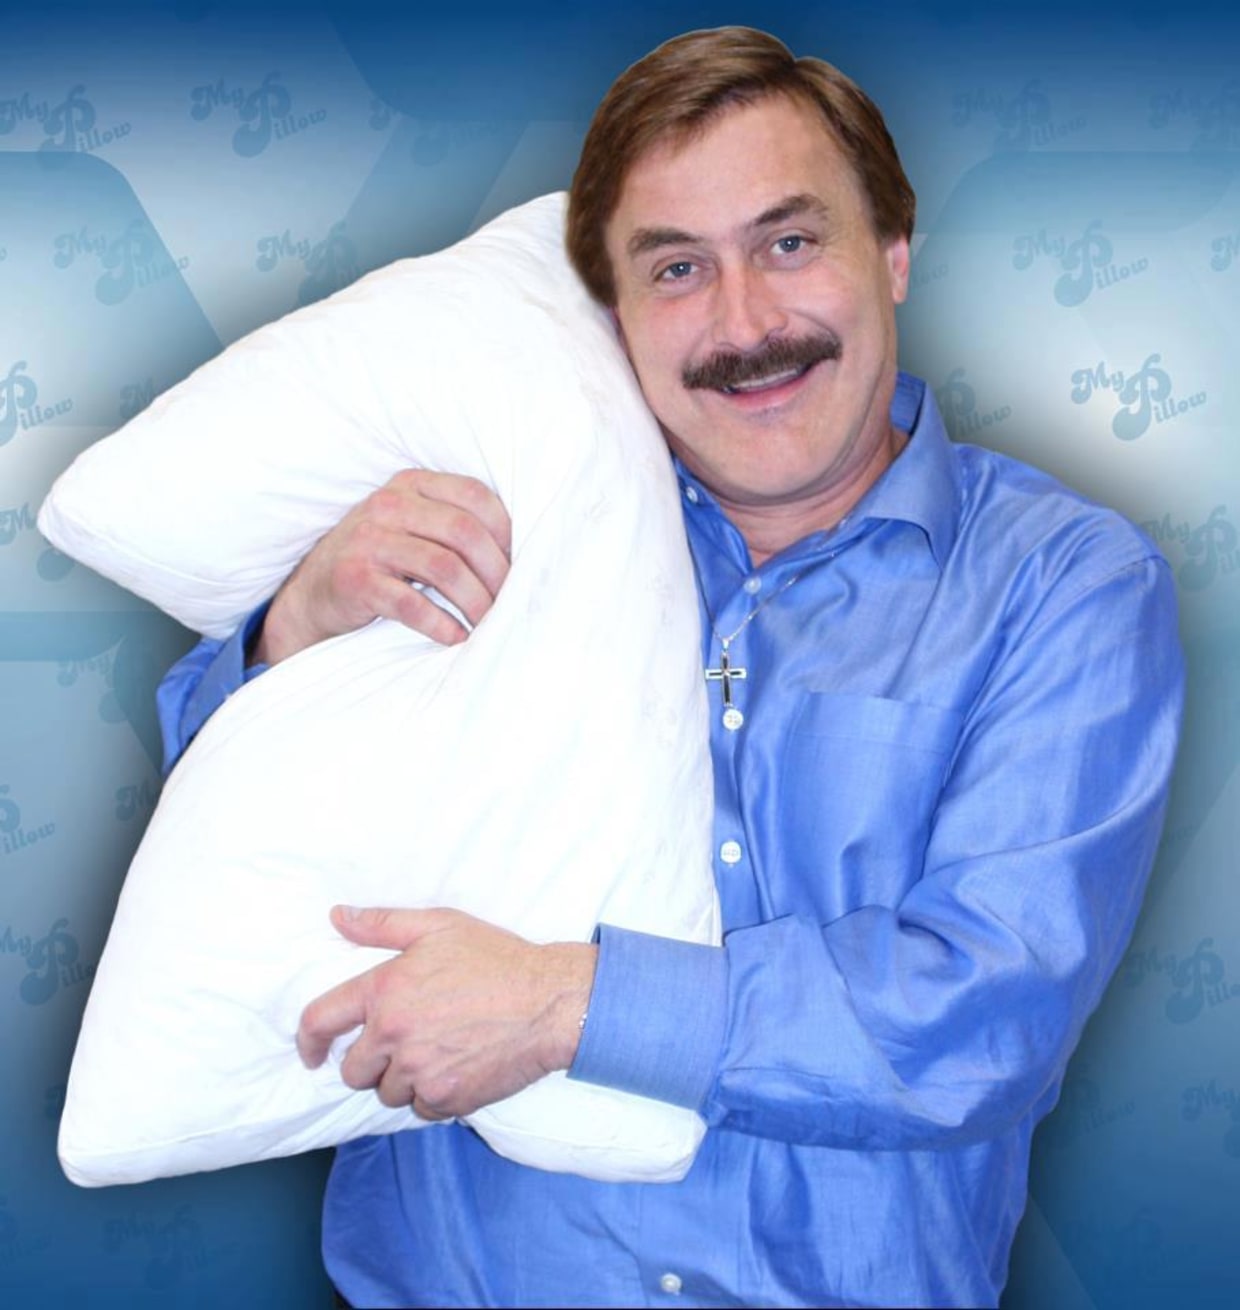 Full of Fluff? MyPillow Ordered to Pay 